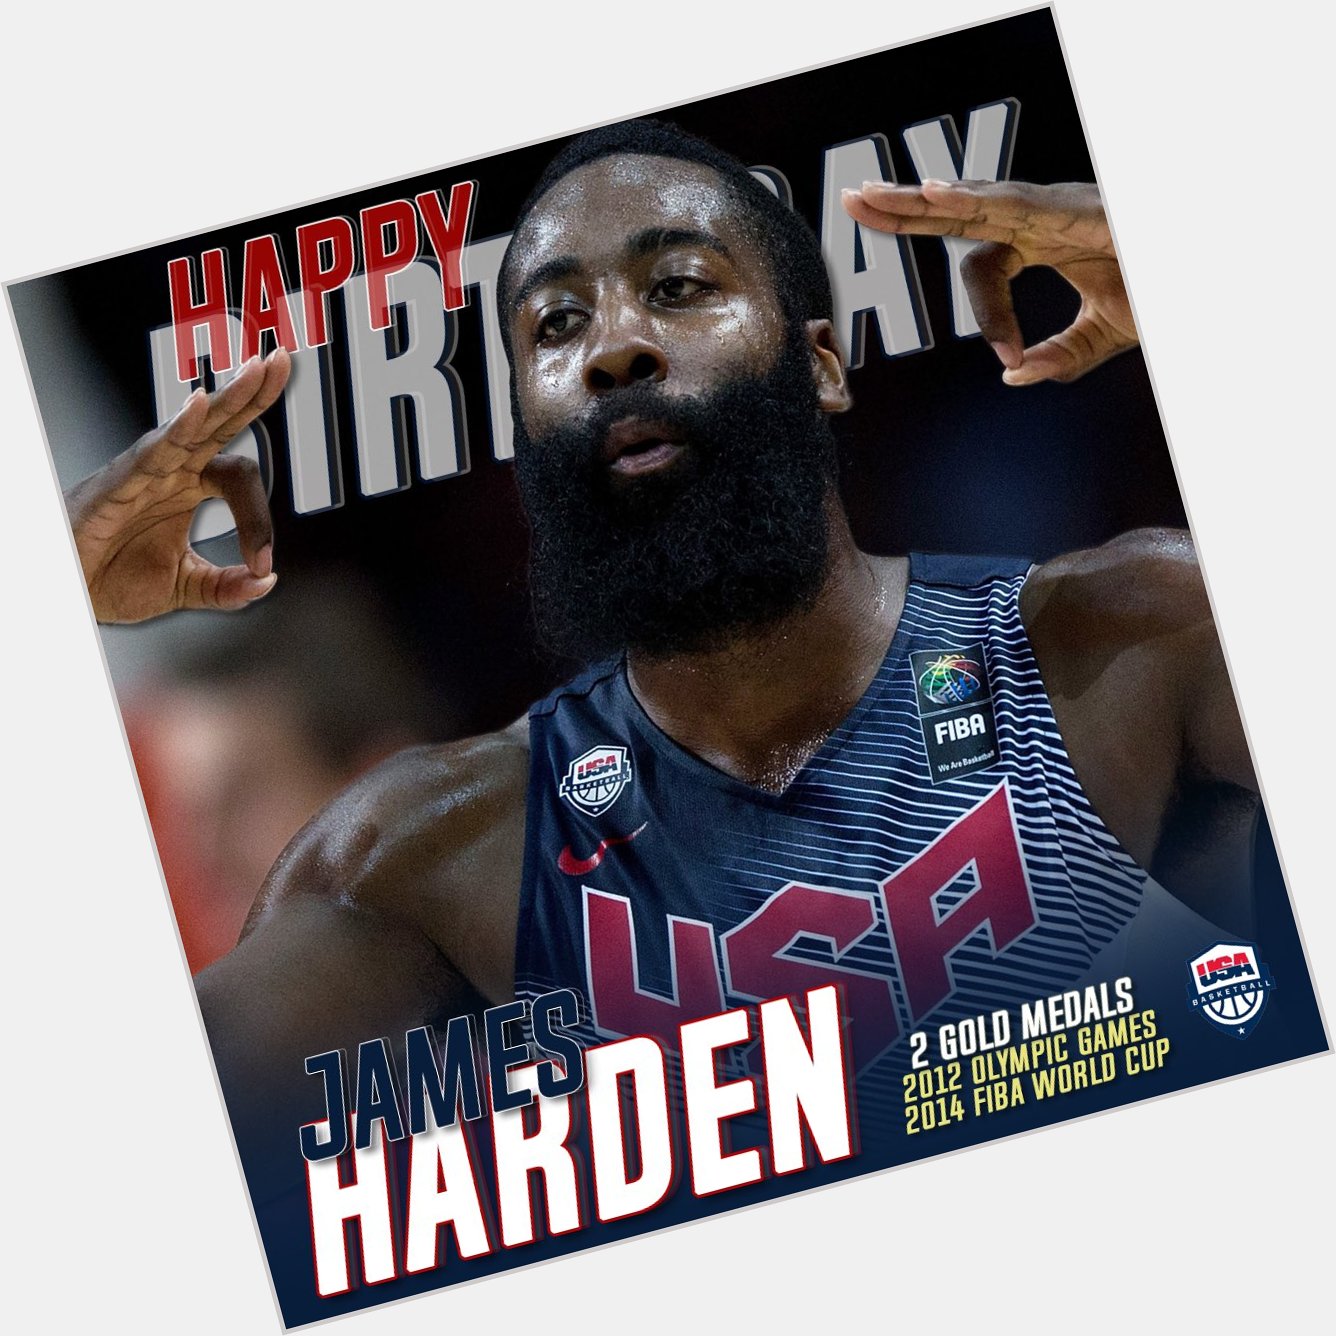 Wishing a happy birthday to 2   USA gold medalist James Harden!   